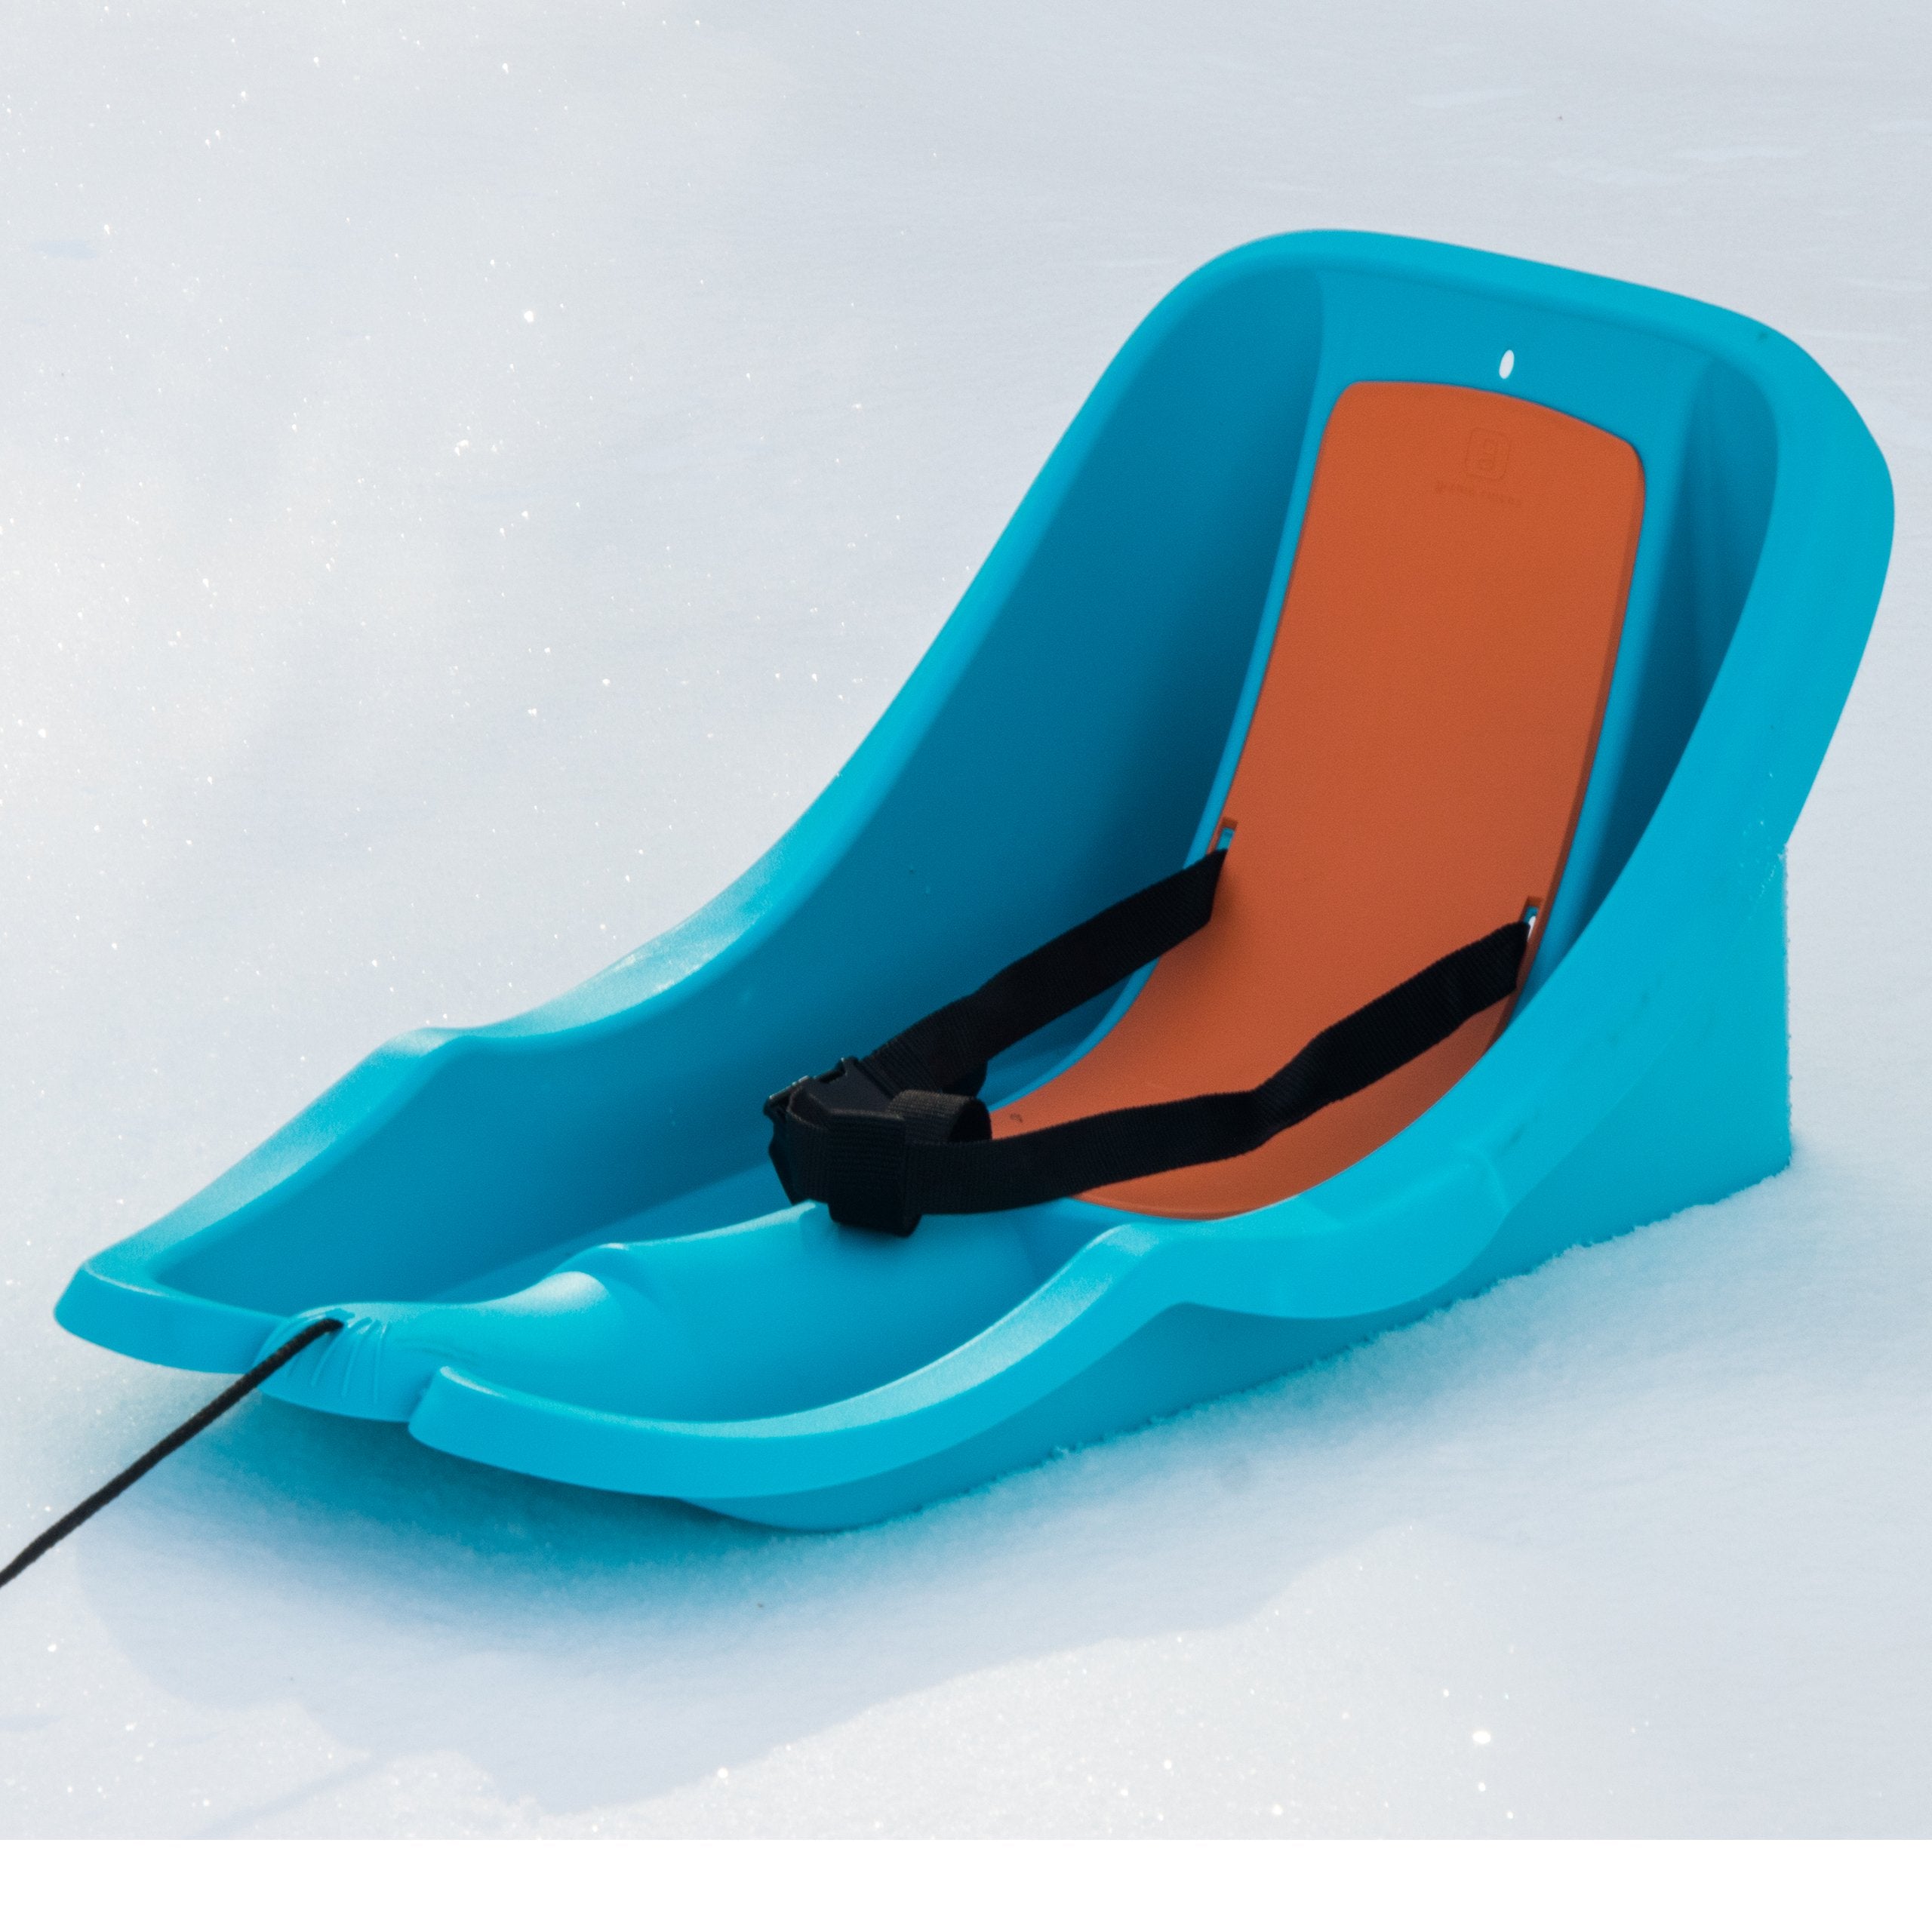 Gizmo Riders Baby Toddler Sled, Ages 6Mo+, Up to 55lbs